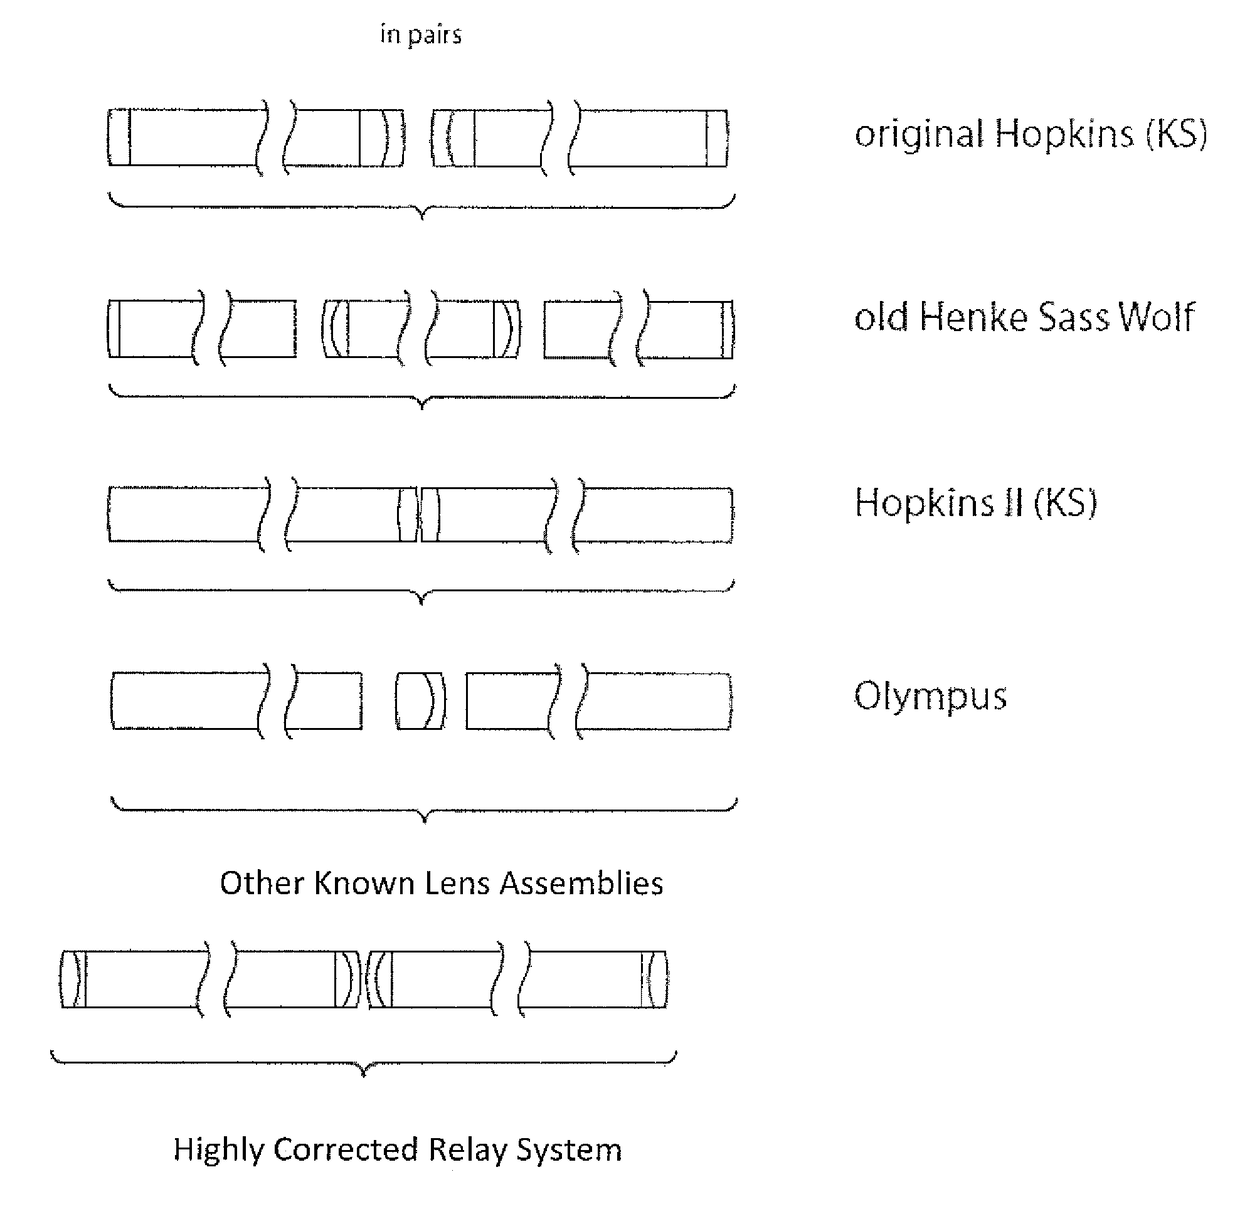 Highly corrected relay system